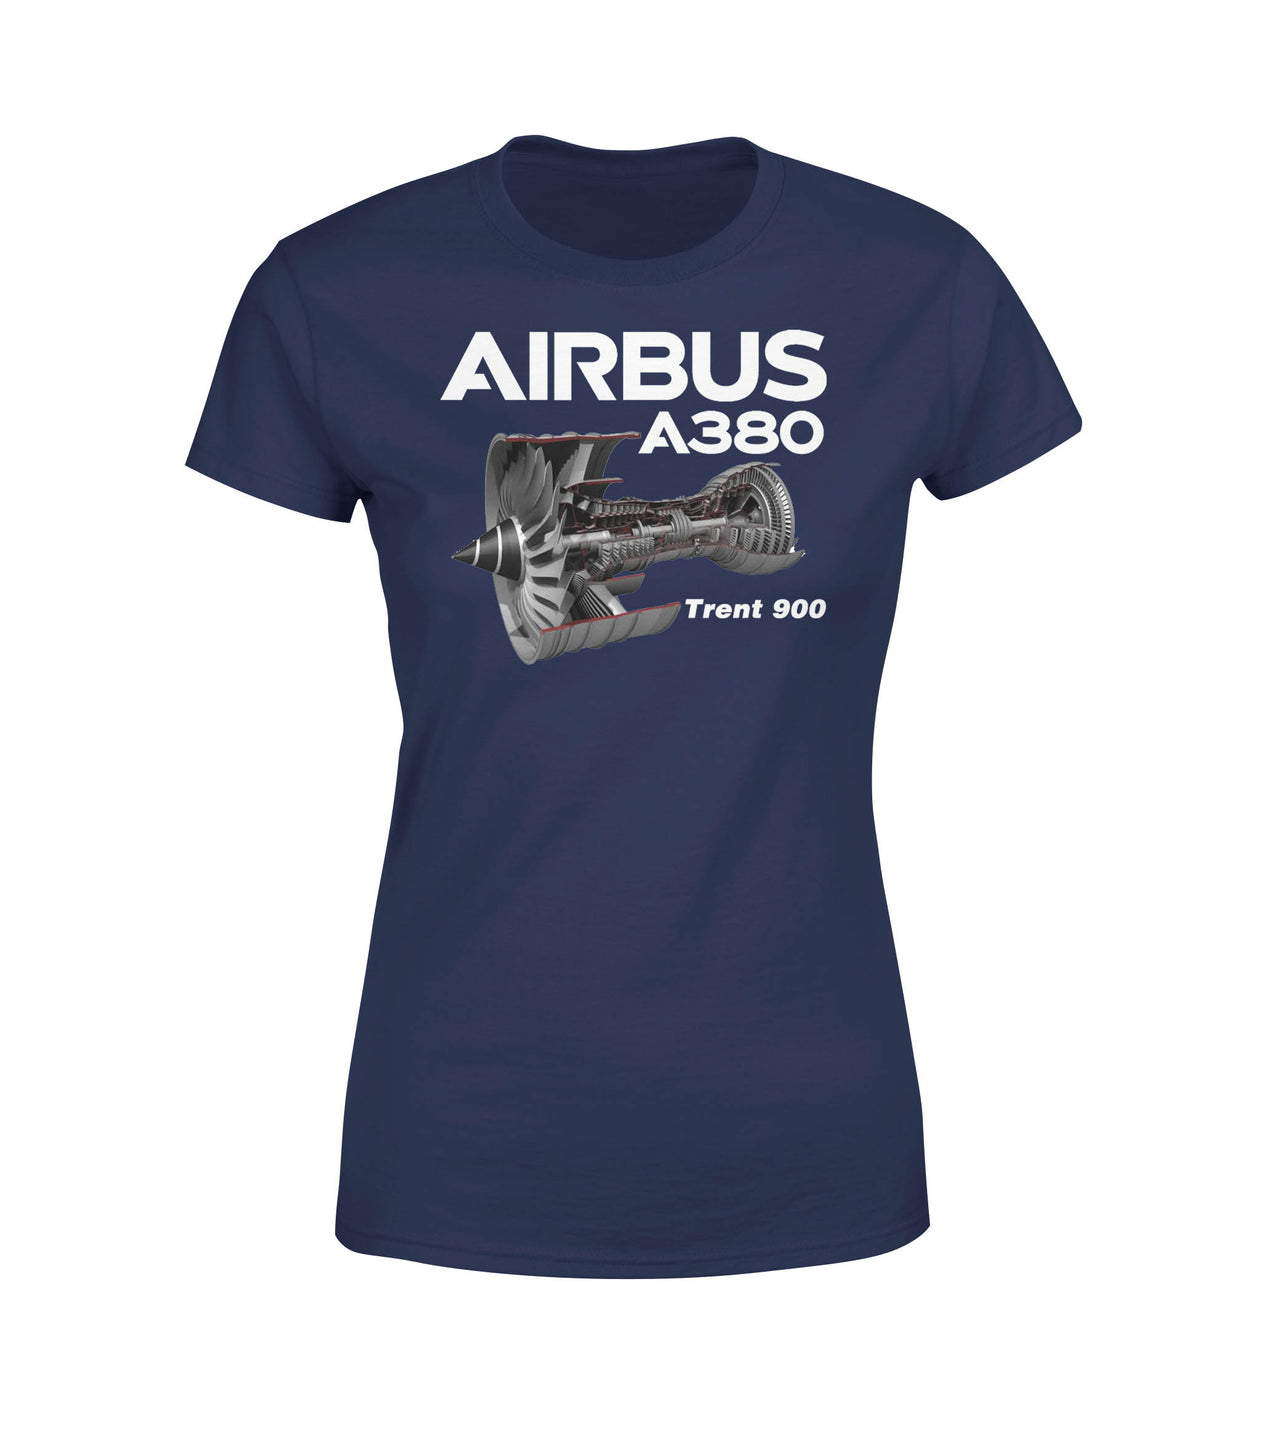 Airbus A380 & Trent 900 Engine Designed Women T-Shirts